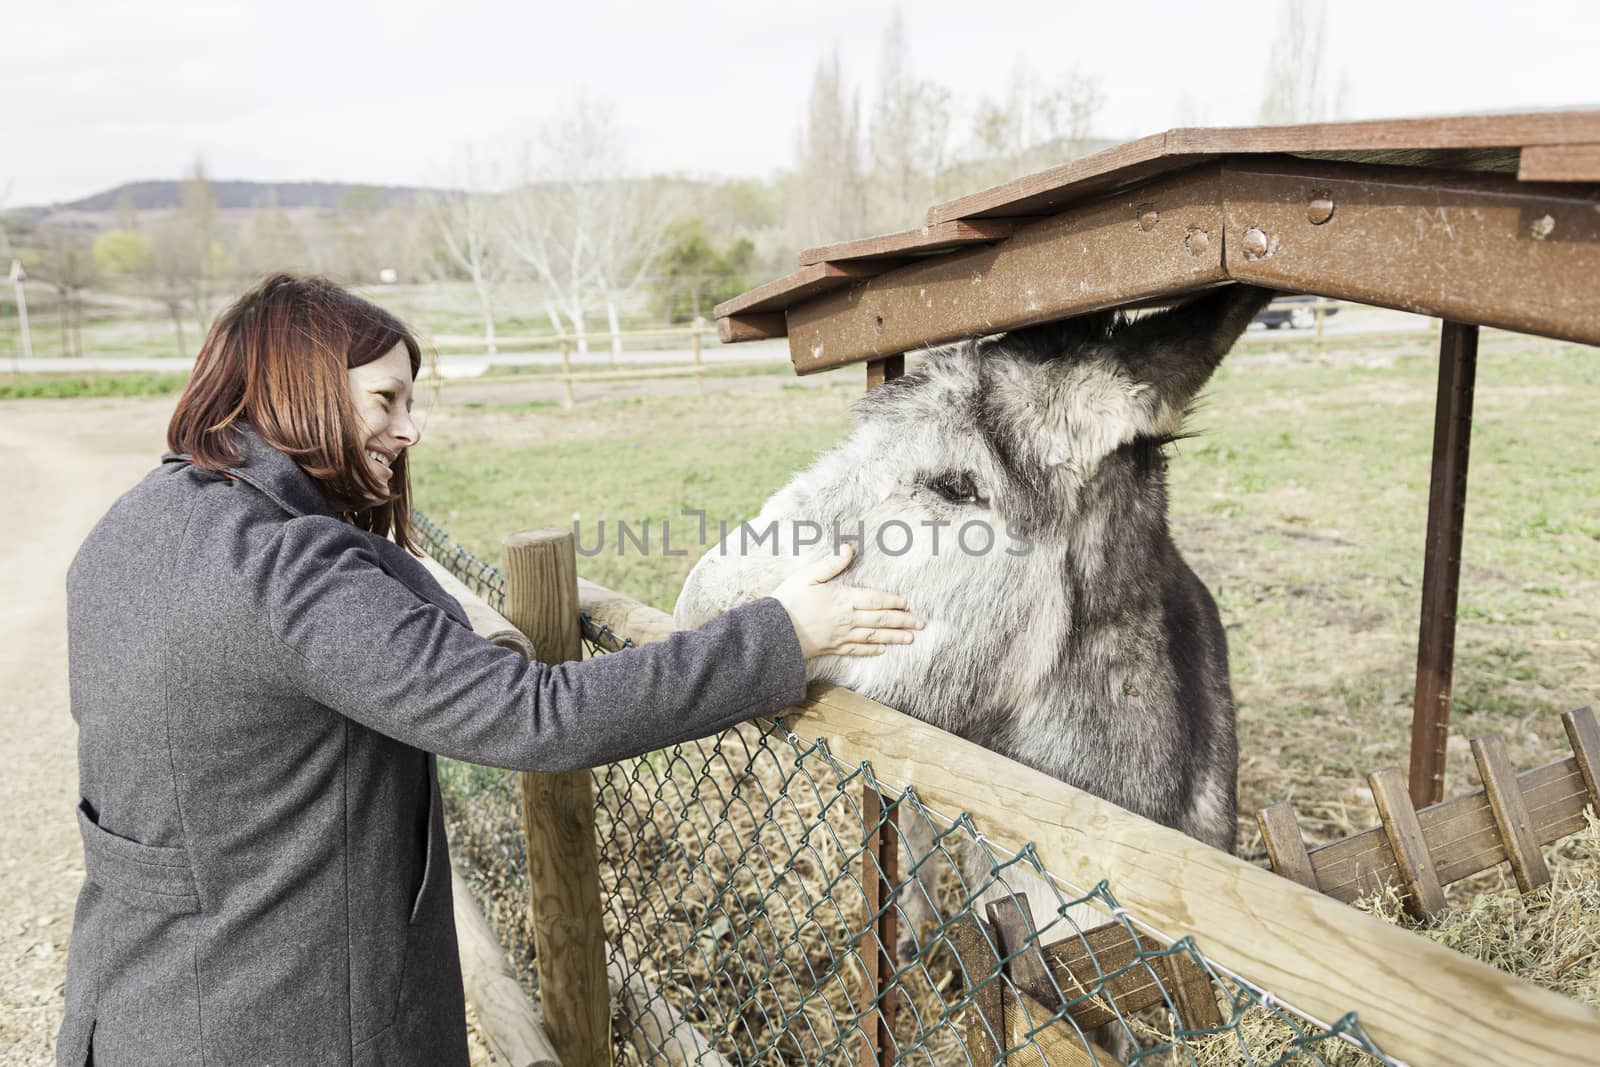 I petting a donkey on a farm, giving details of a person to an animal affection